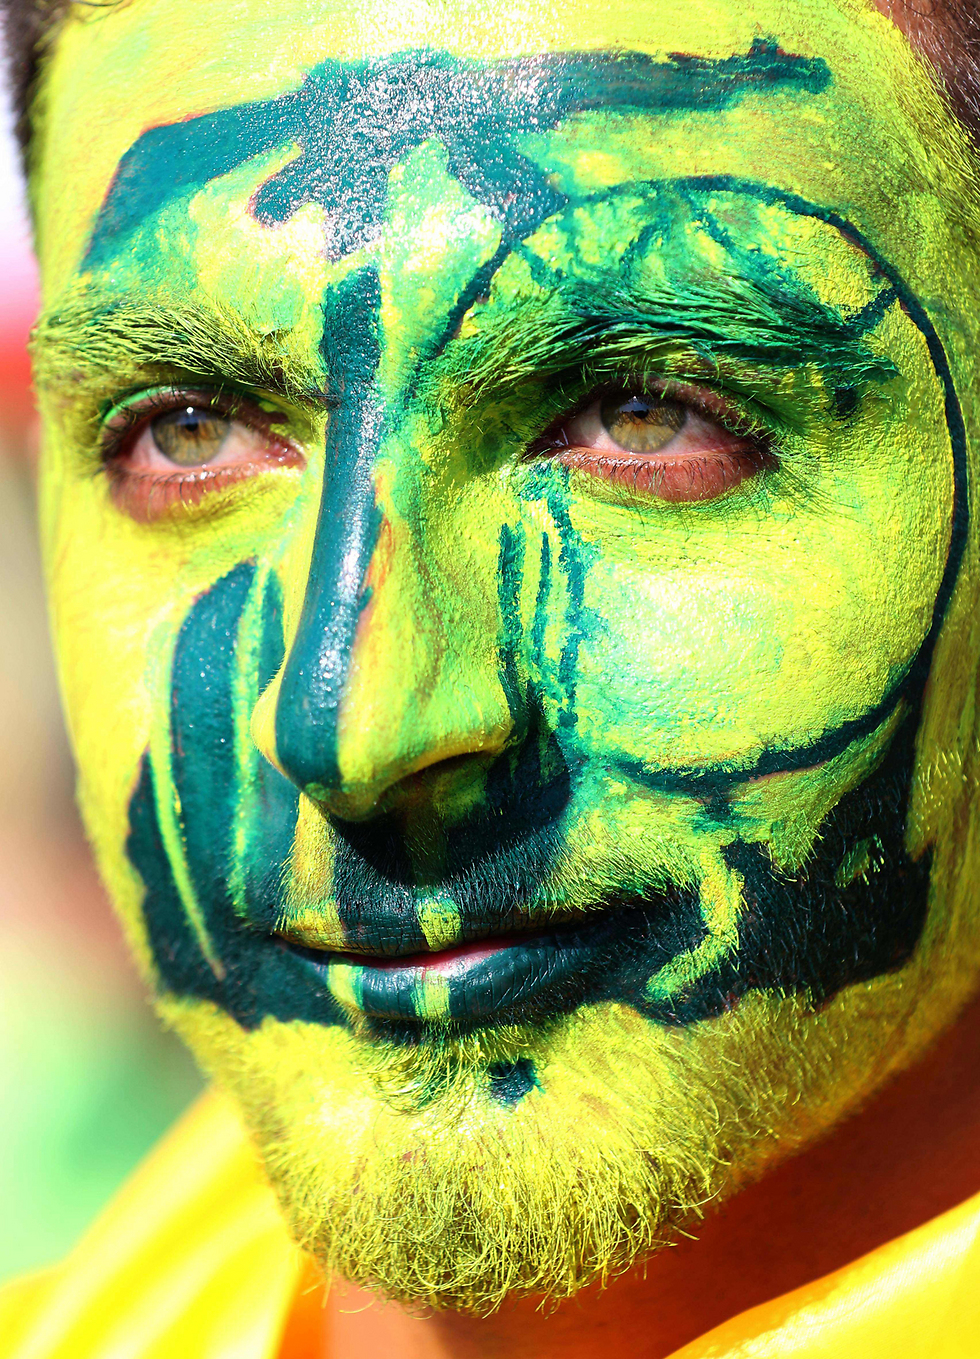 A Hezbollah supporter has his face painted with the Hezbollah logo (Photo: AFP)